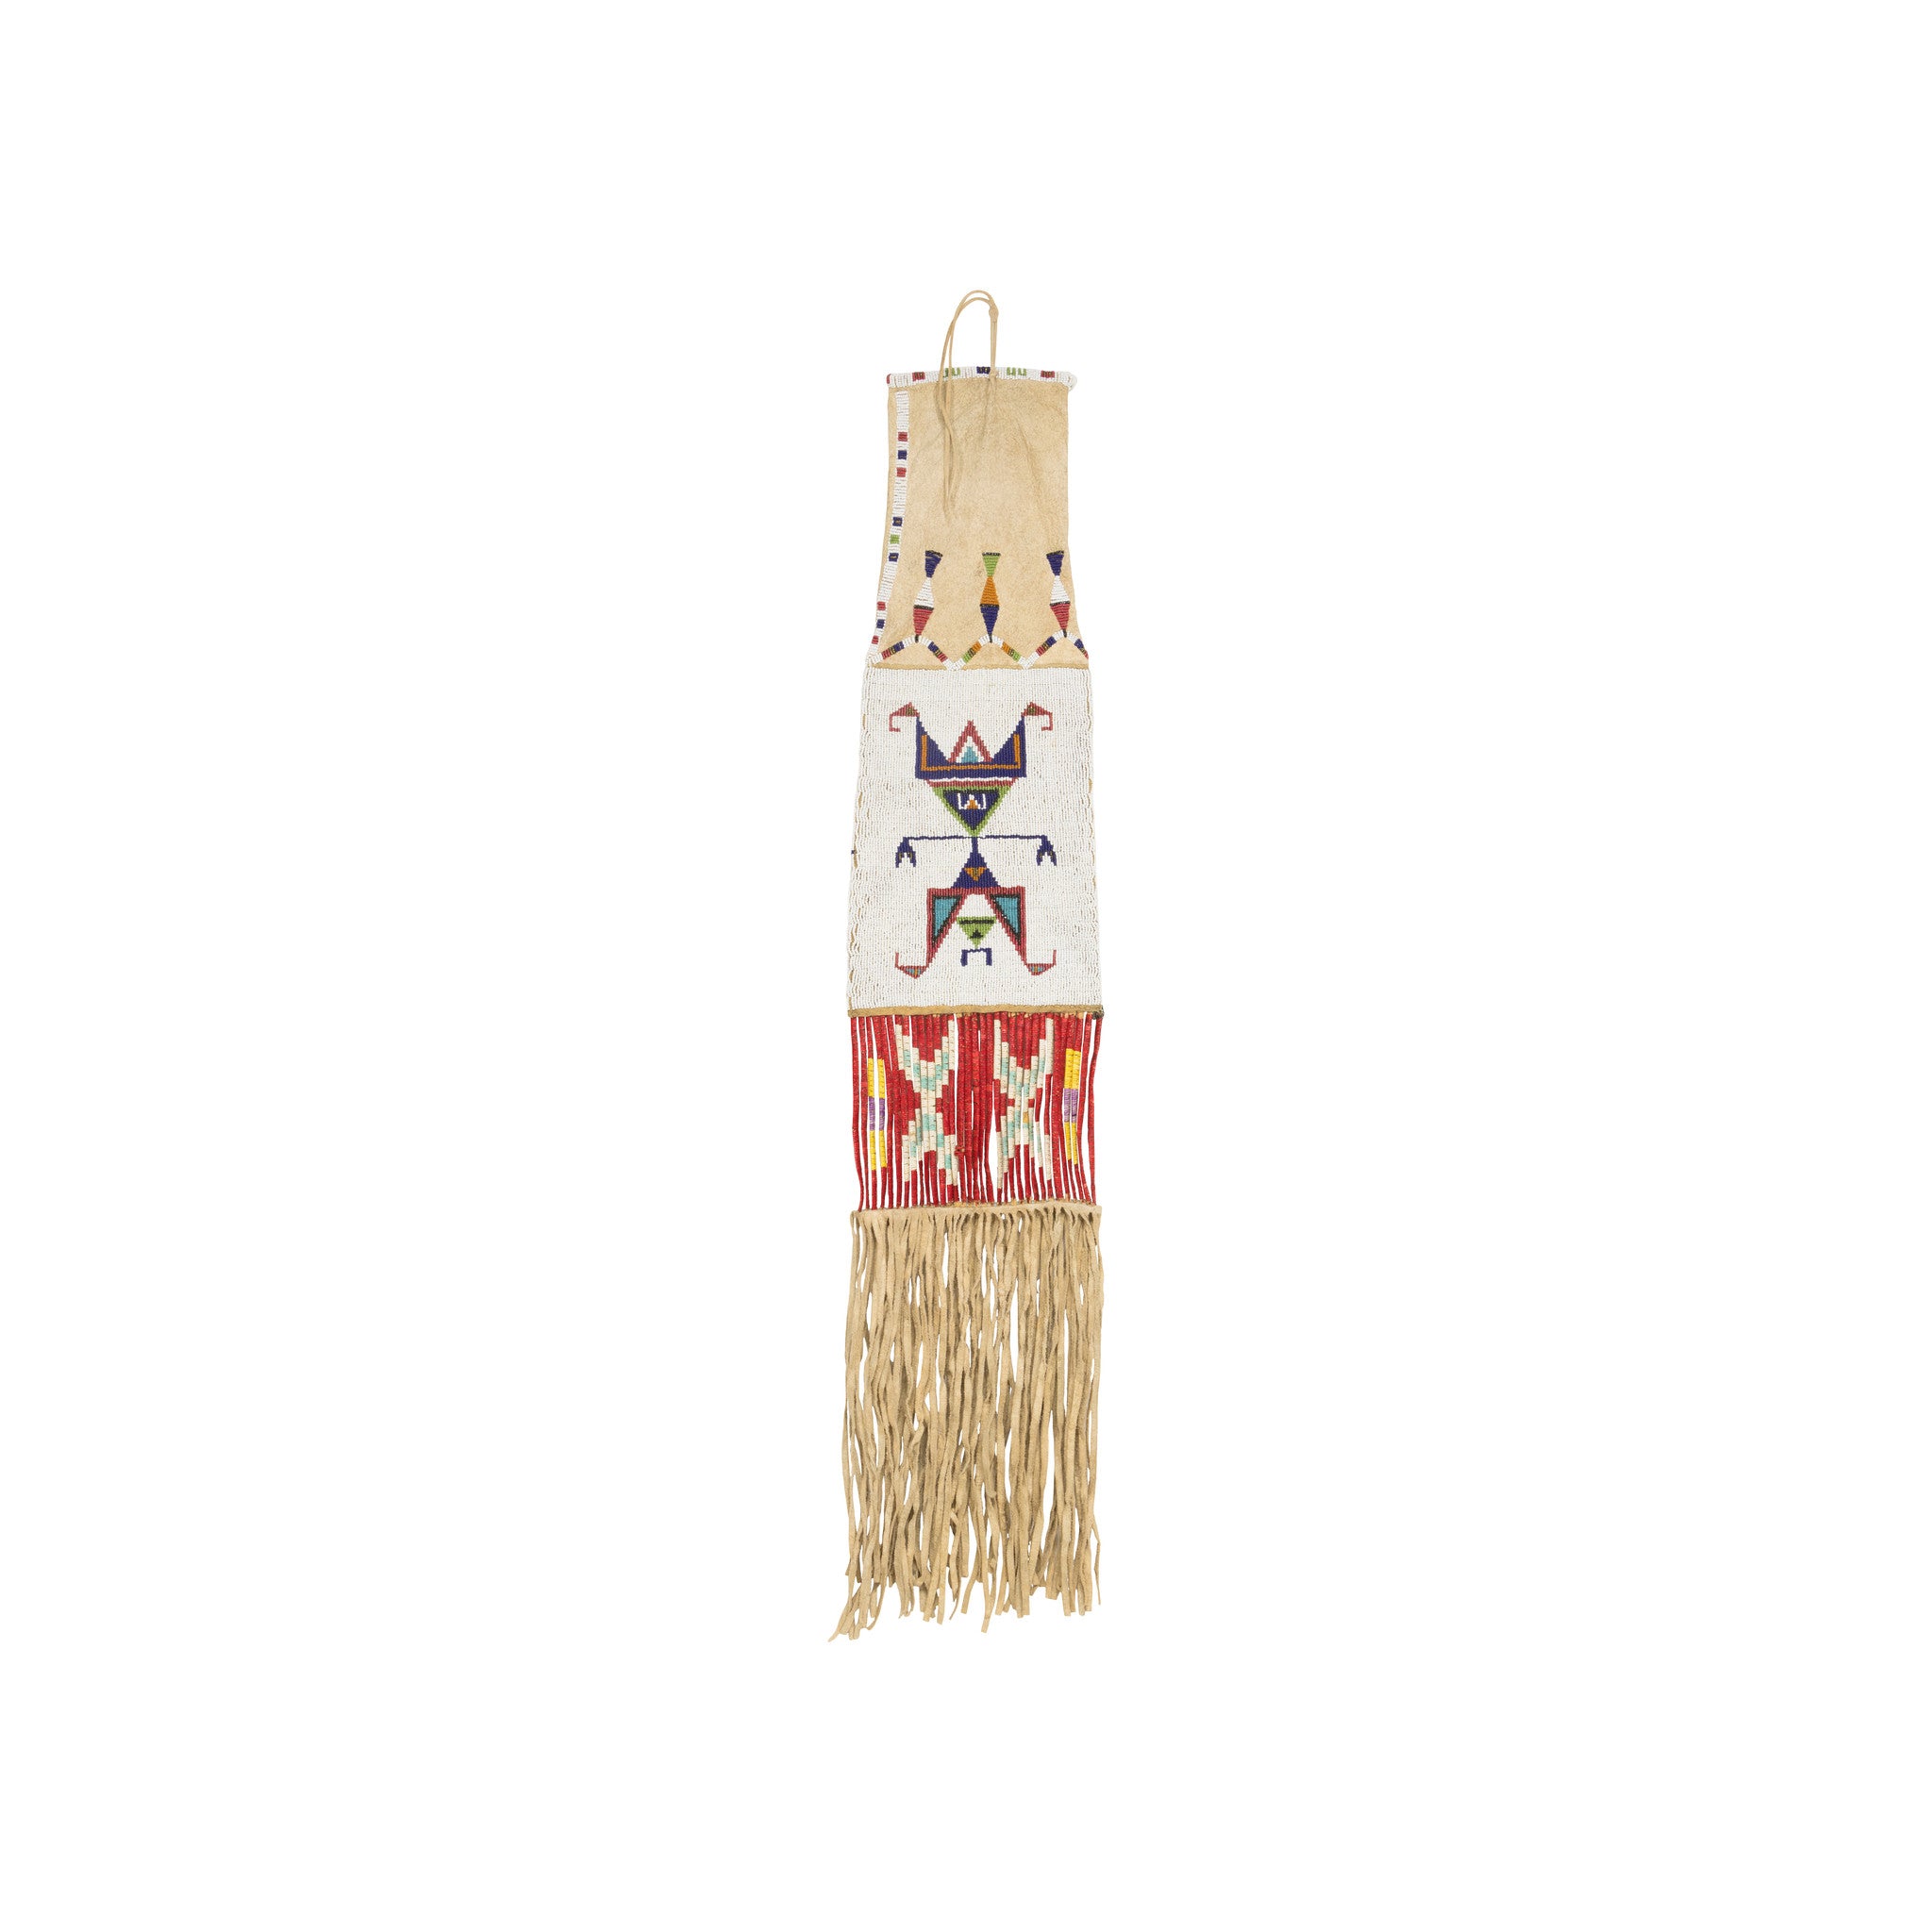 Sioux Beaded Pipe Bag